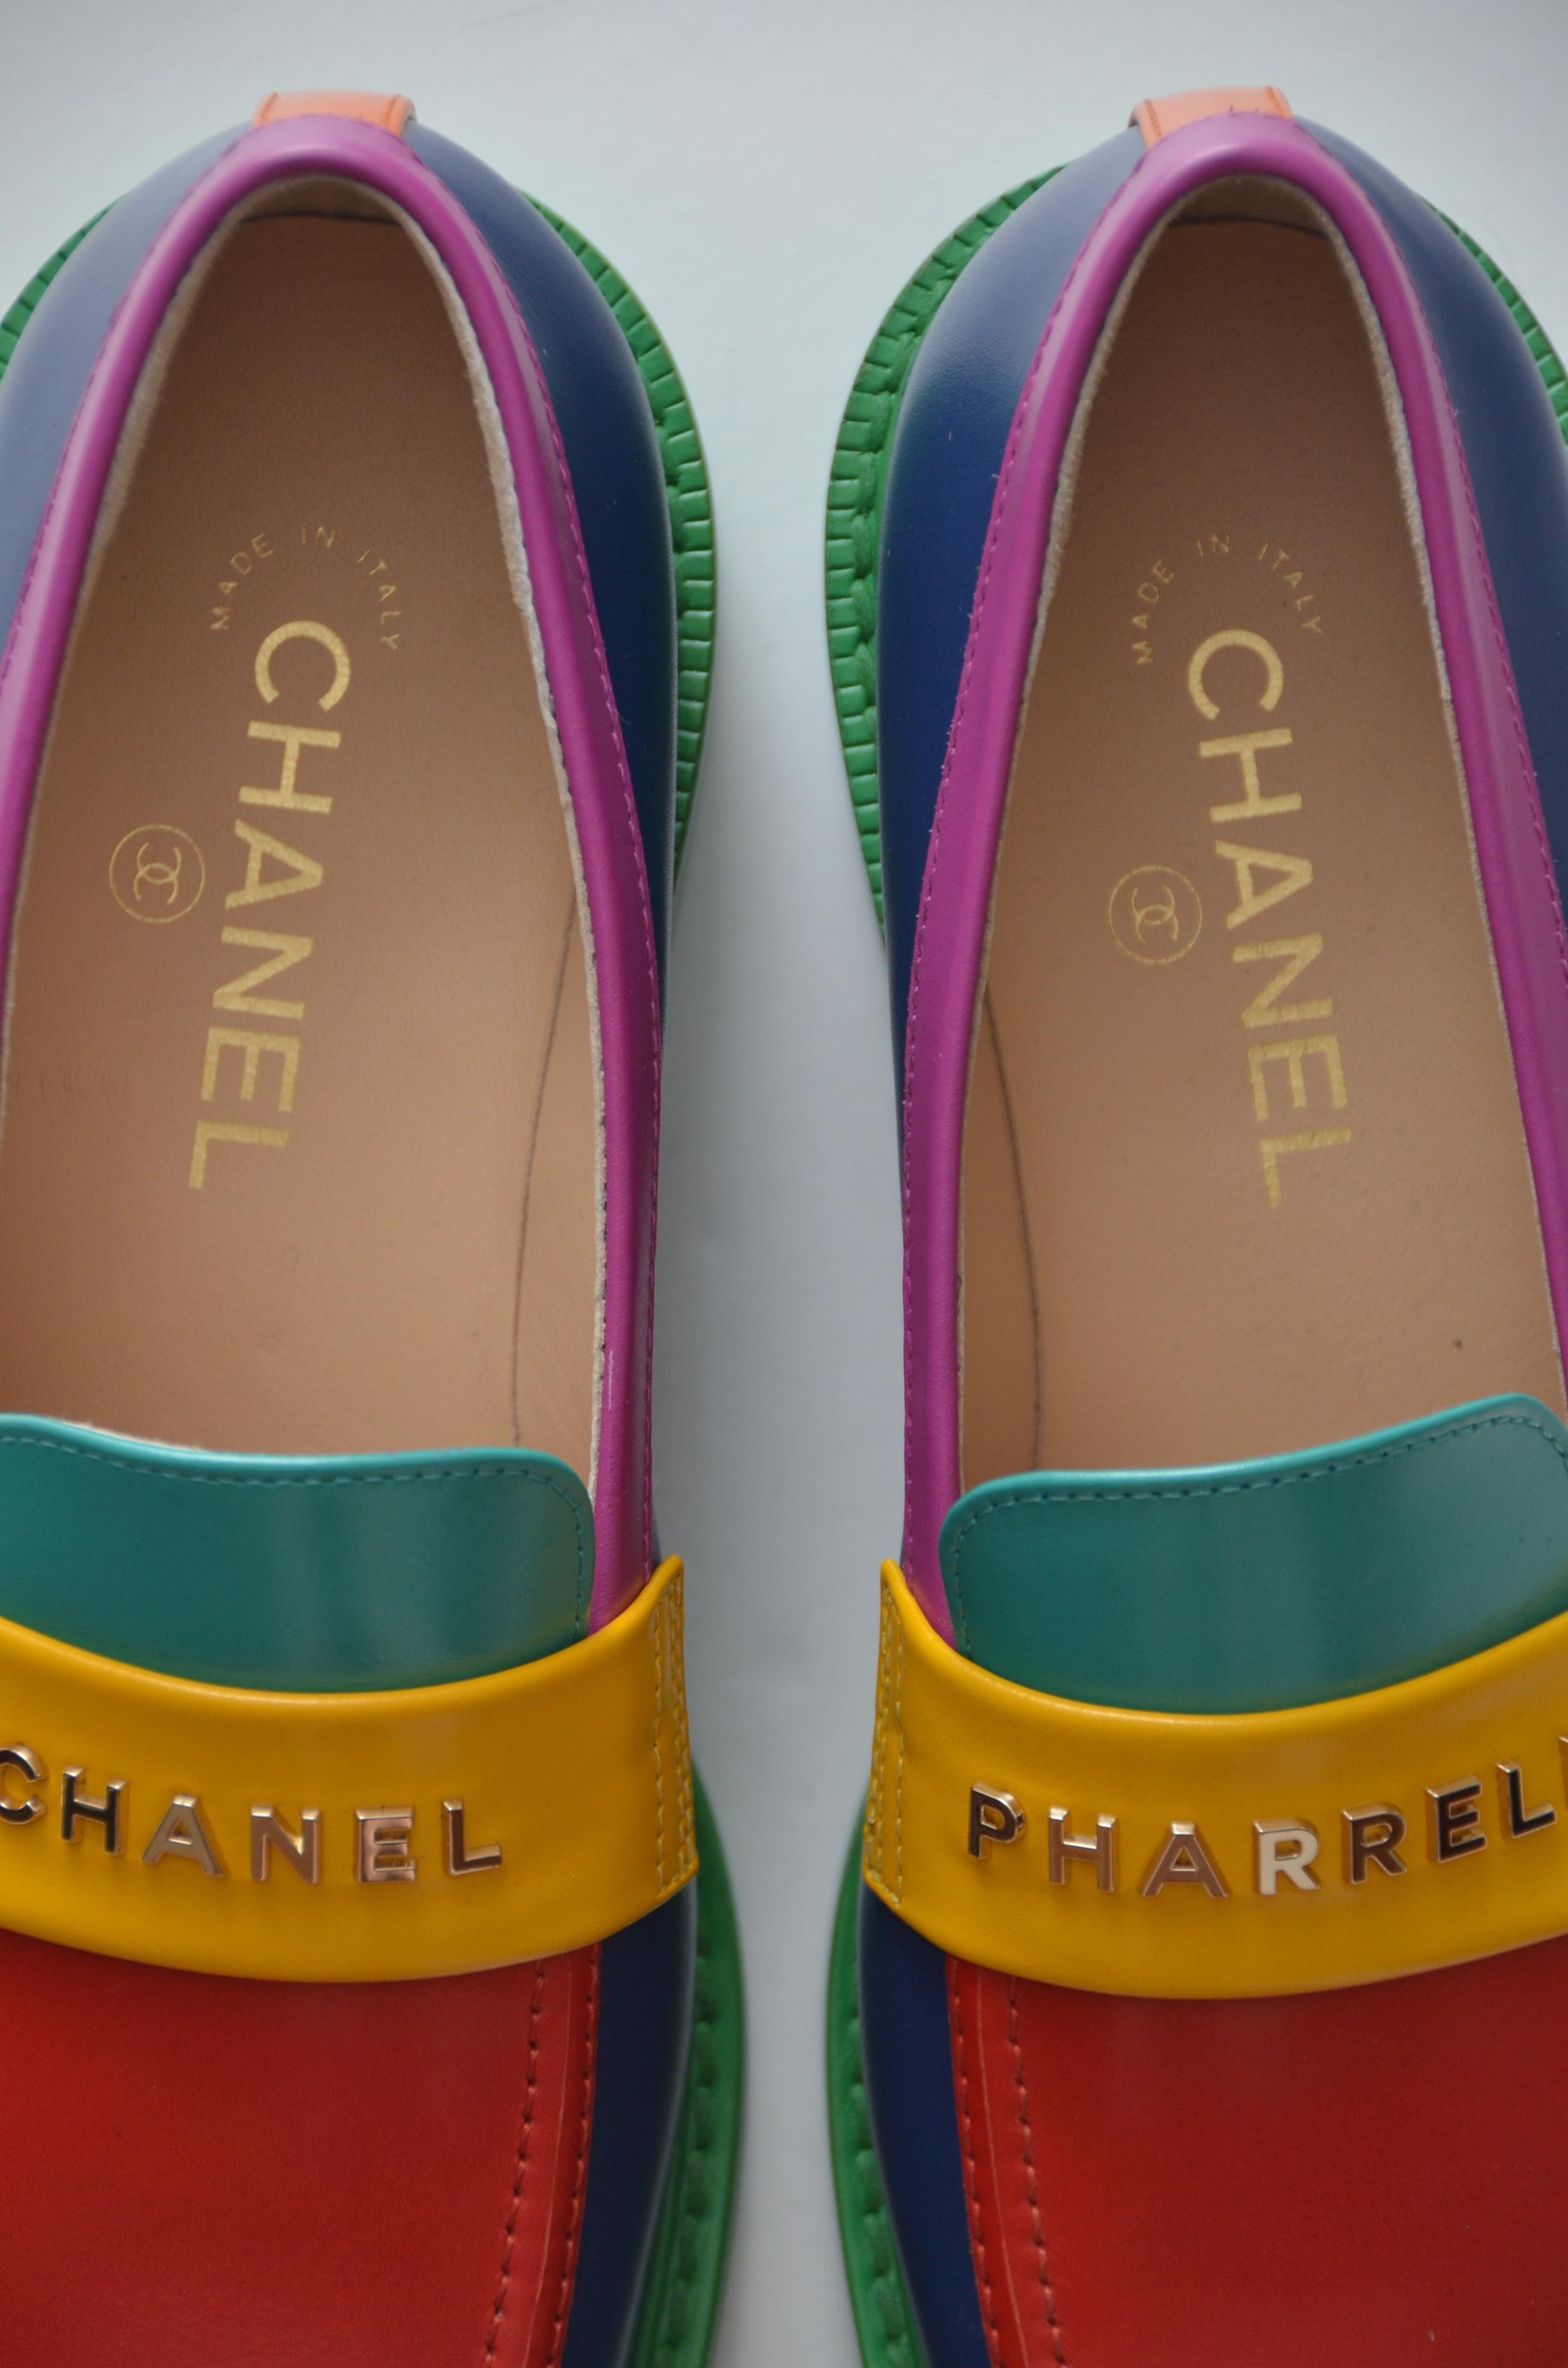 Chanel x Pharrell Capsule Collection Leather multicolor loafers
 
An urban capsule collection highlighting Pharrell Williams’ longterm relationship with the House of Chanel and initiated by Karl Lagerfeld .   
Please note:due to camera flashlight